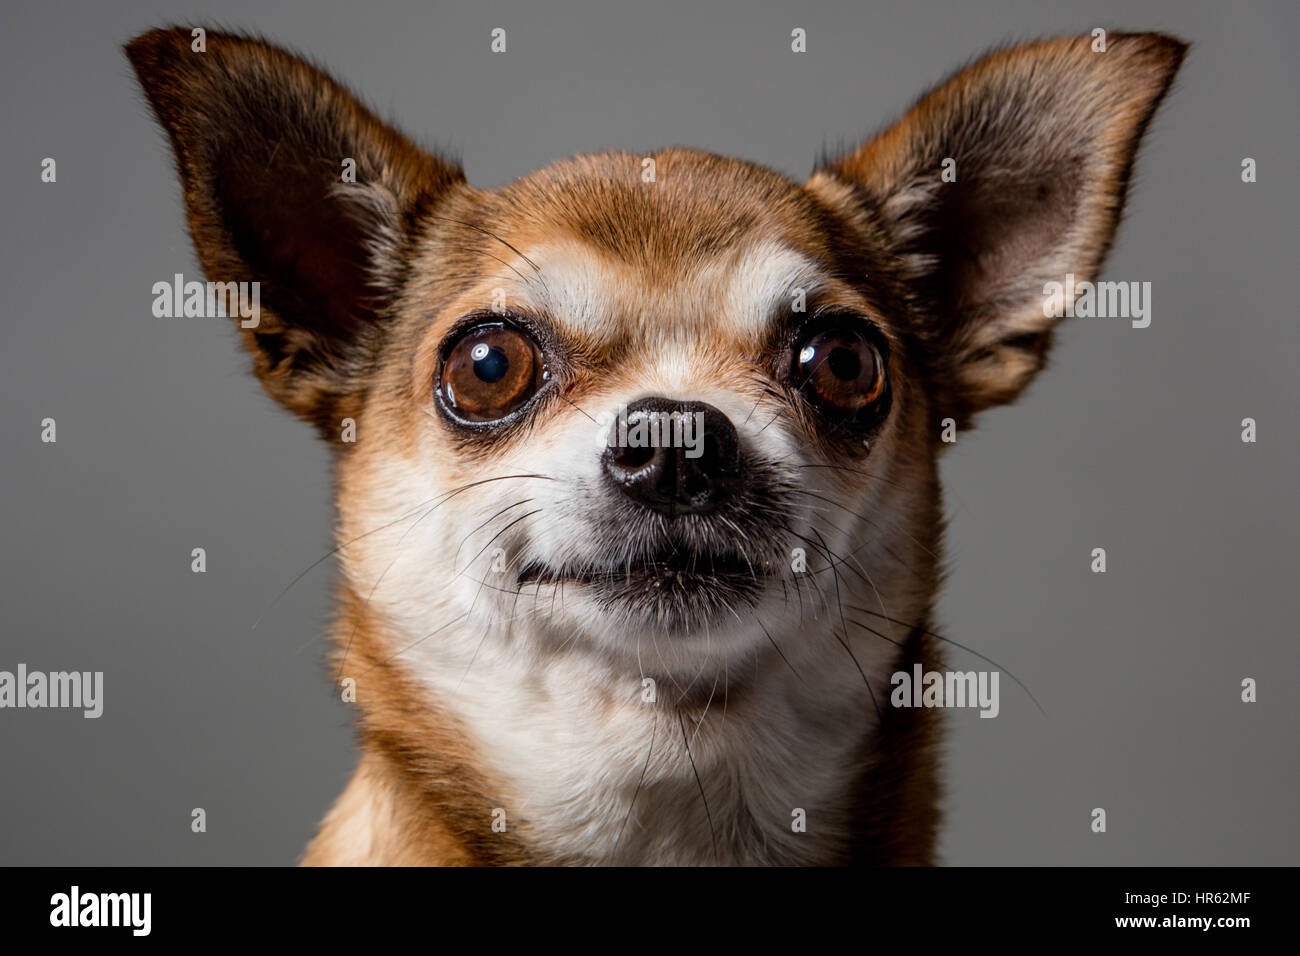 Close-up portrait of fawn-colored chihuahua looking directly at camera with a happy expression. Stock Photo